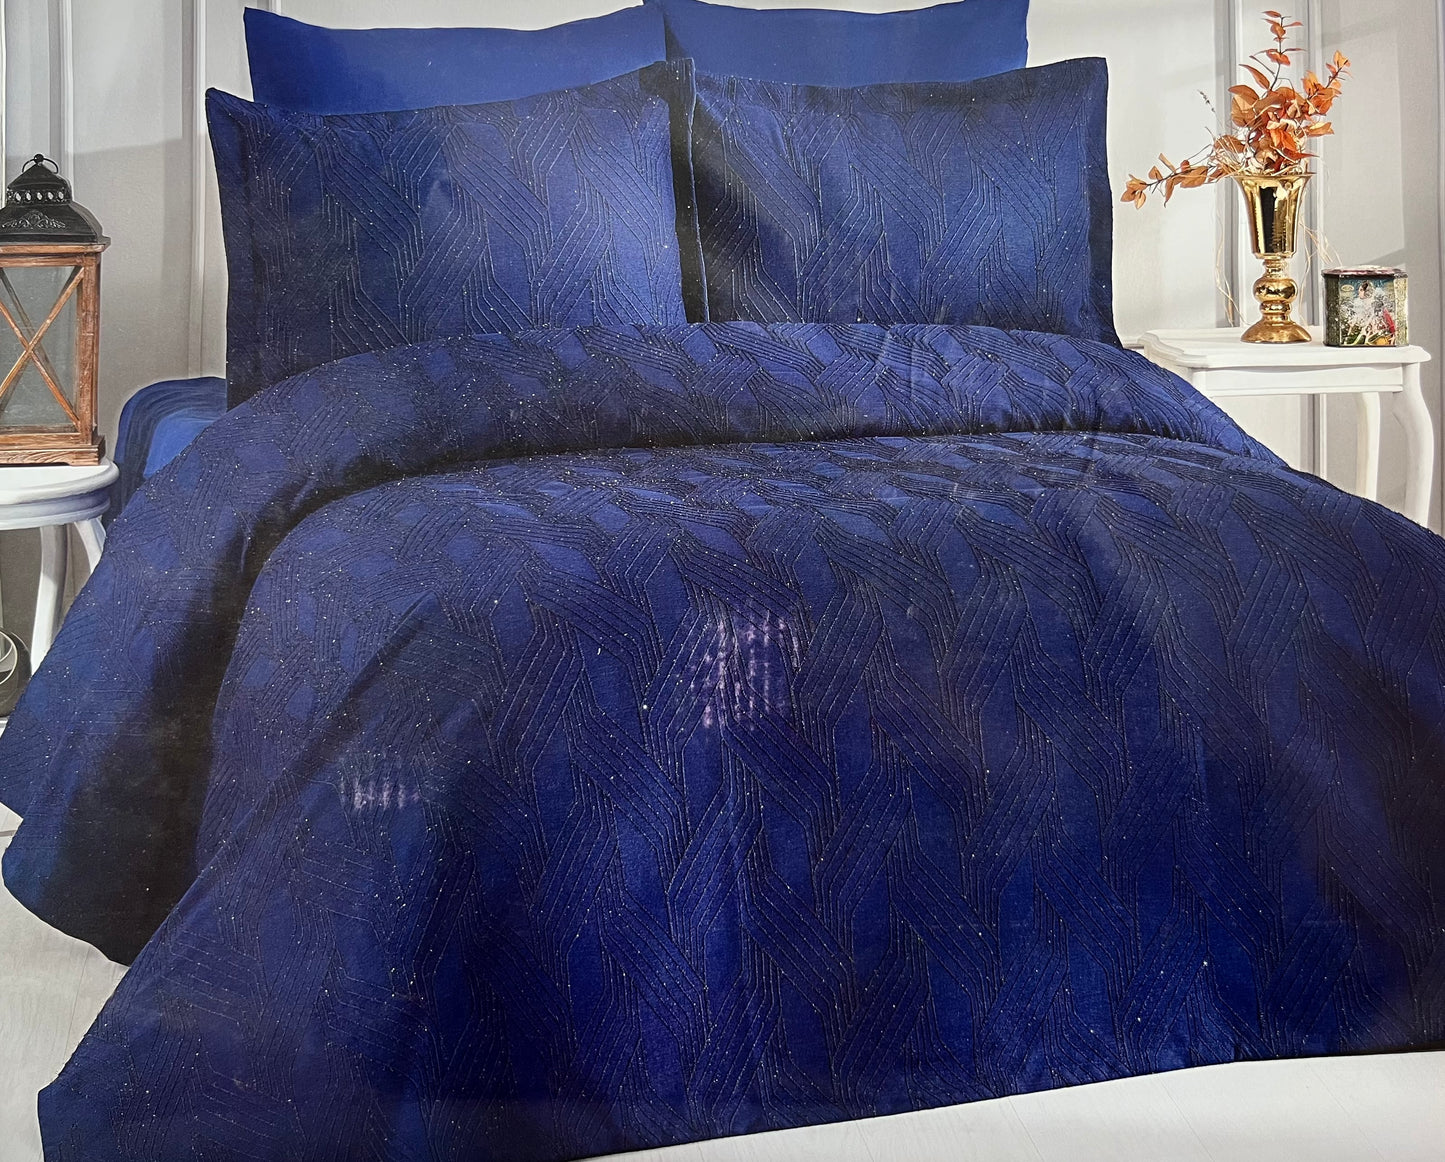 Luxury bedding set with Solo Blue embroidery